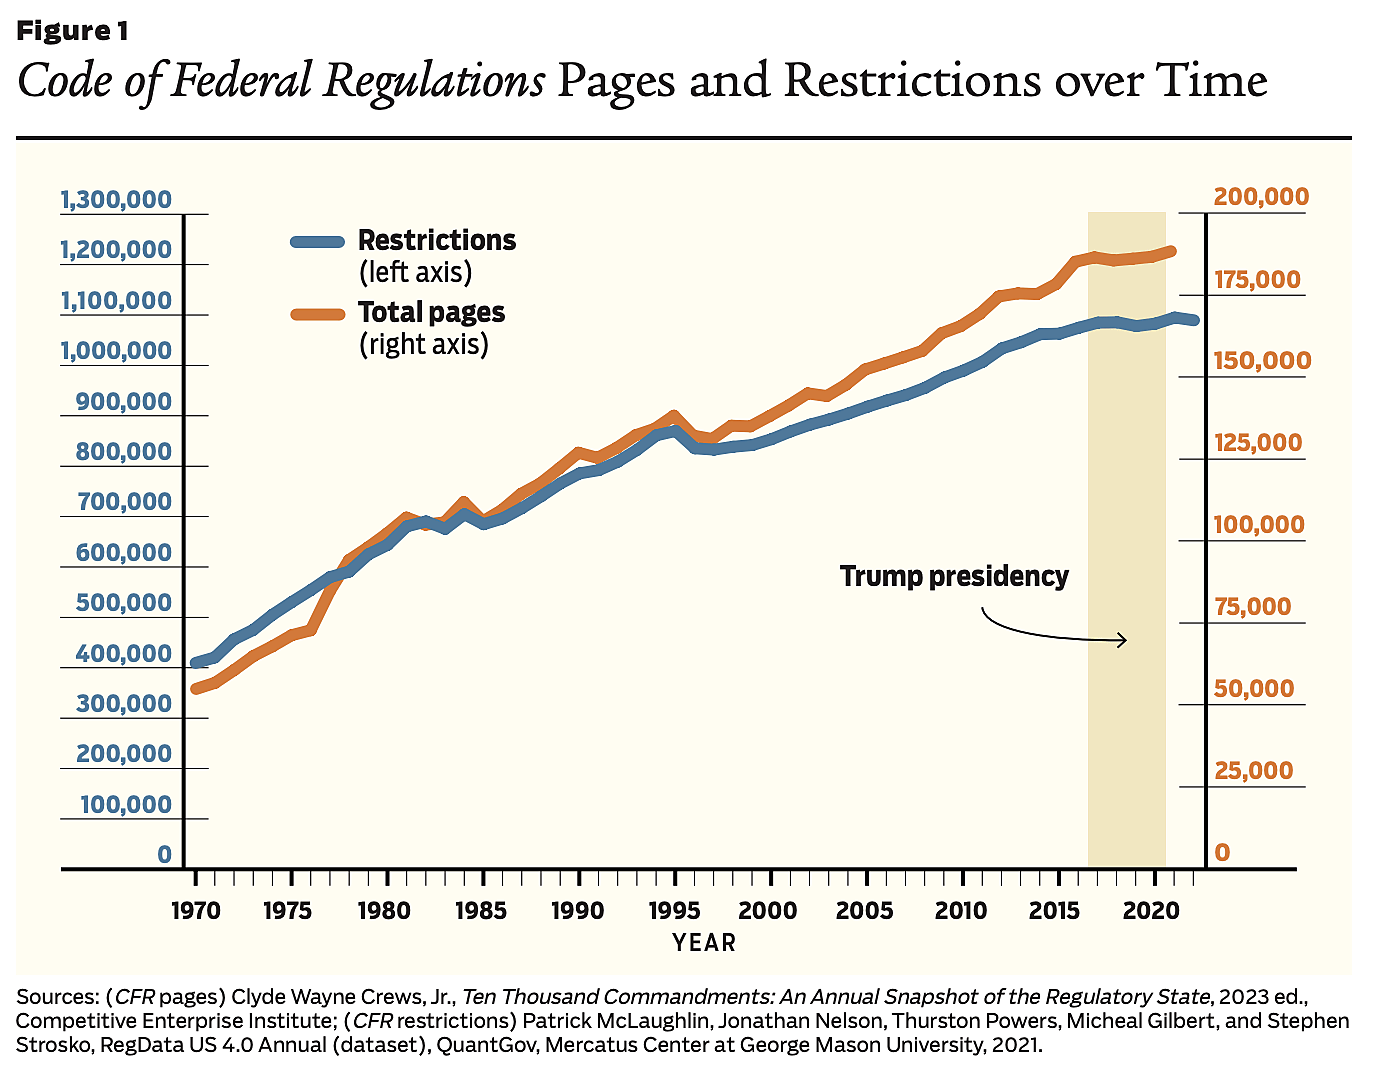 Code of Federal Regulations Pages and Restrictions over Time